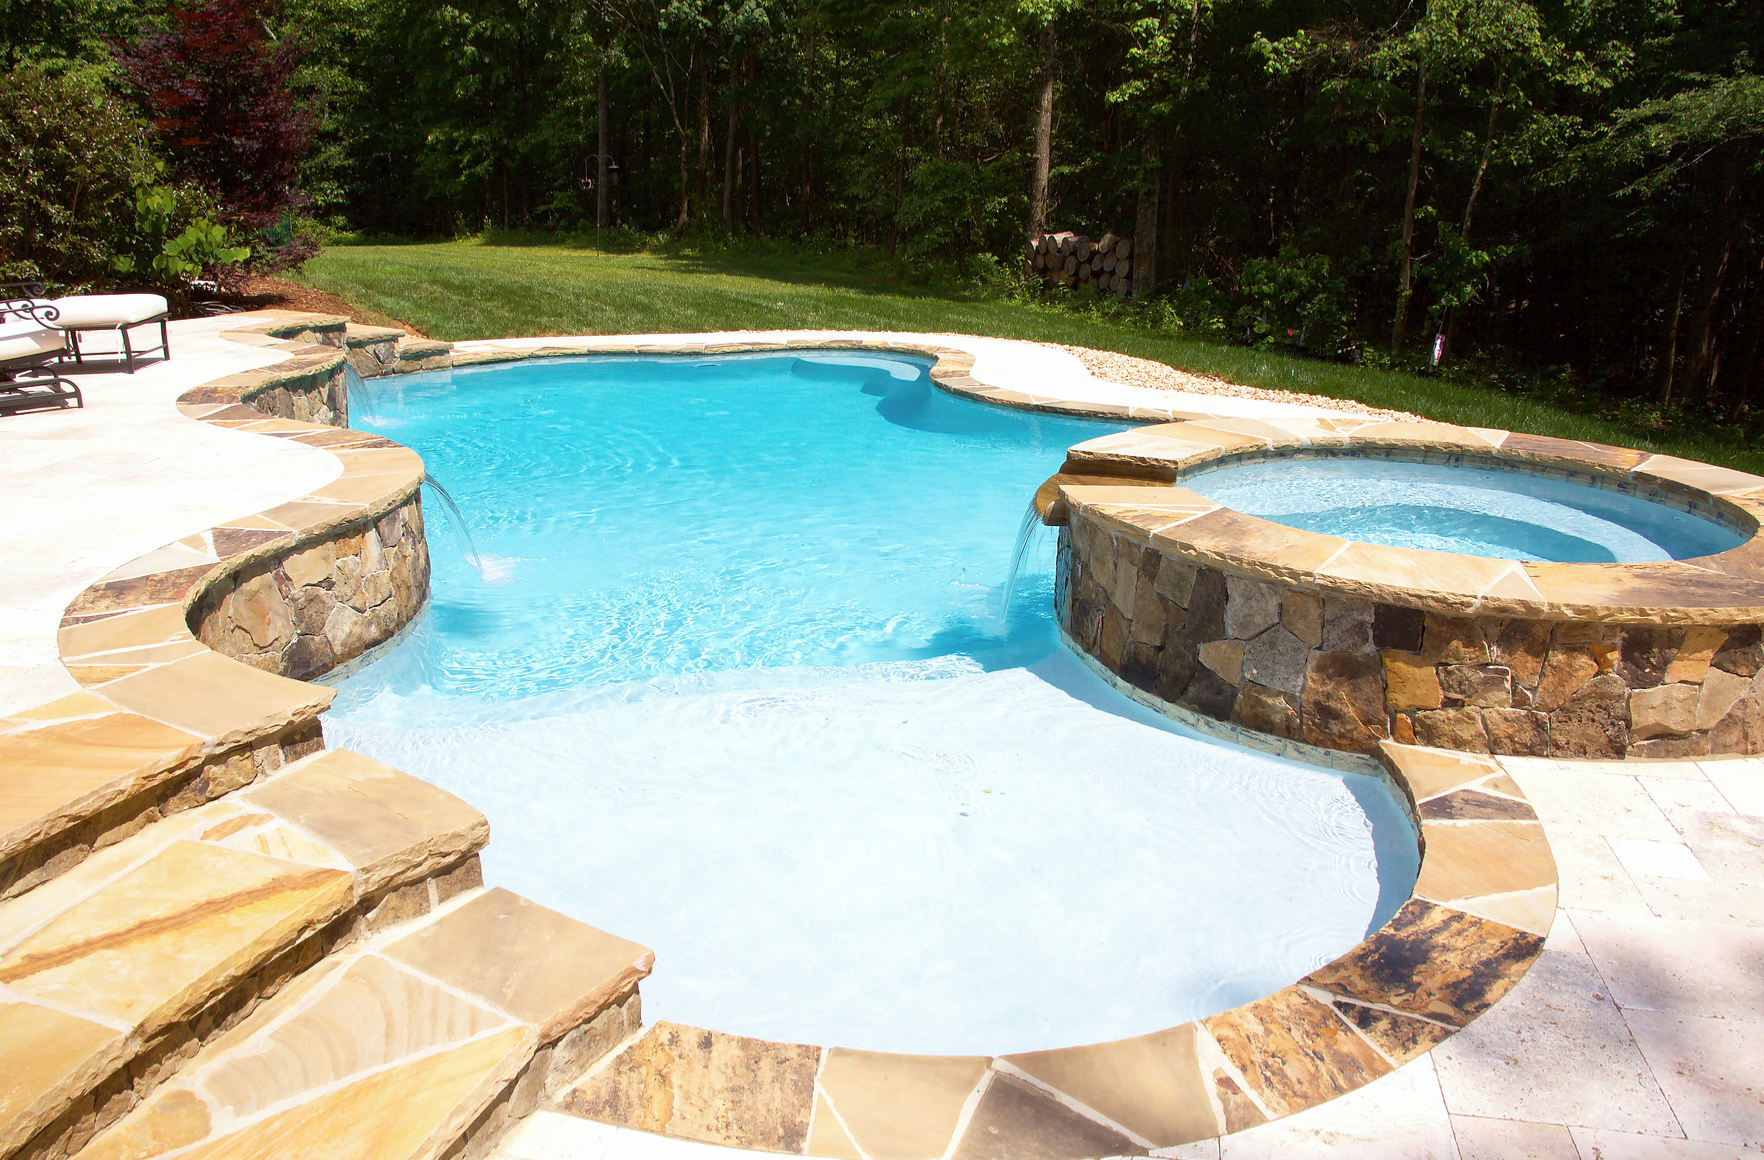 Call CPC Pools at 704-799-5236 for Charlotte North Carolina Concrete Inground Pool Installation